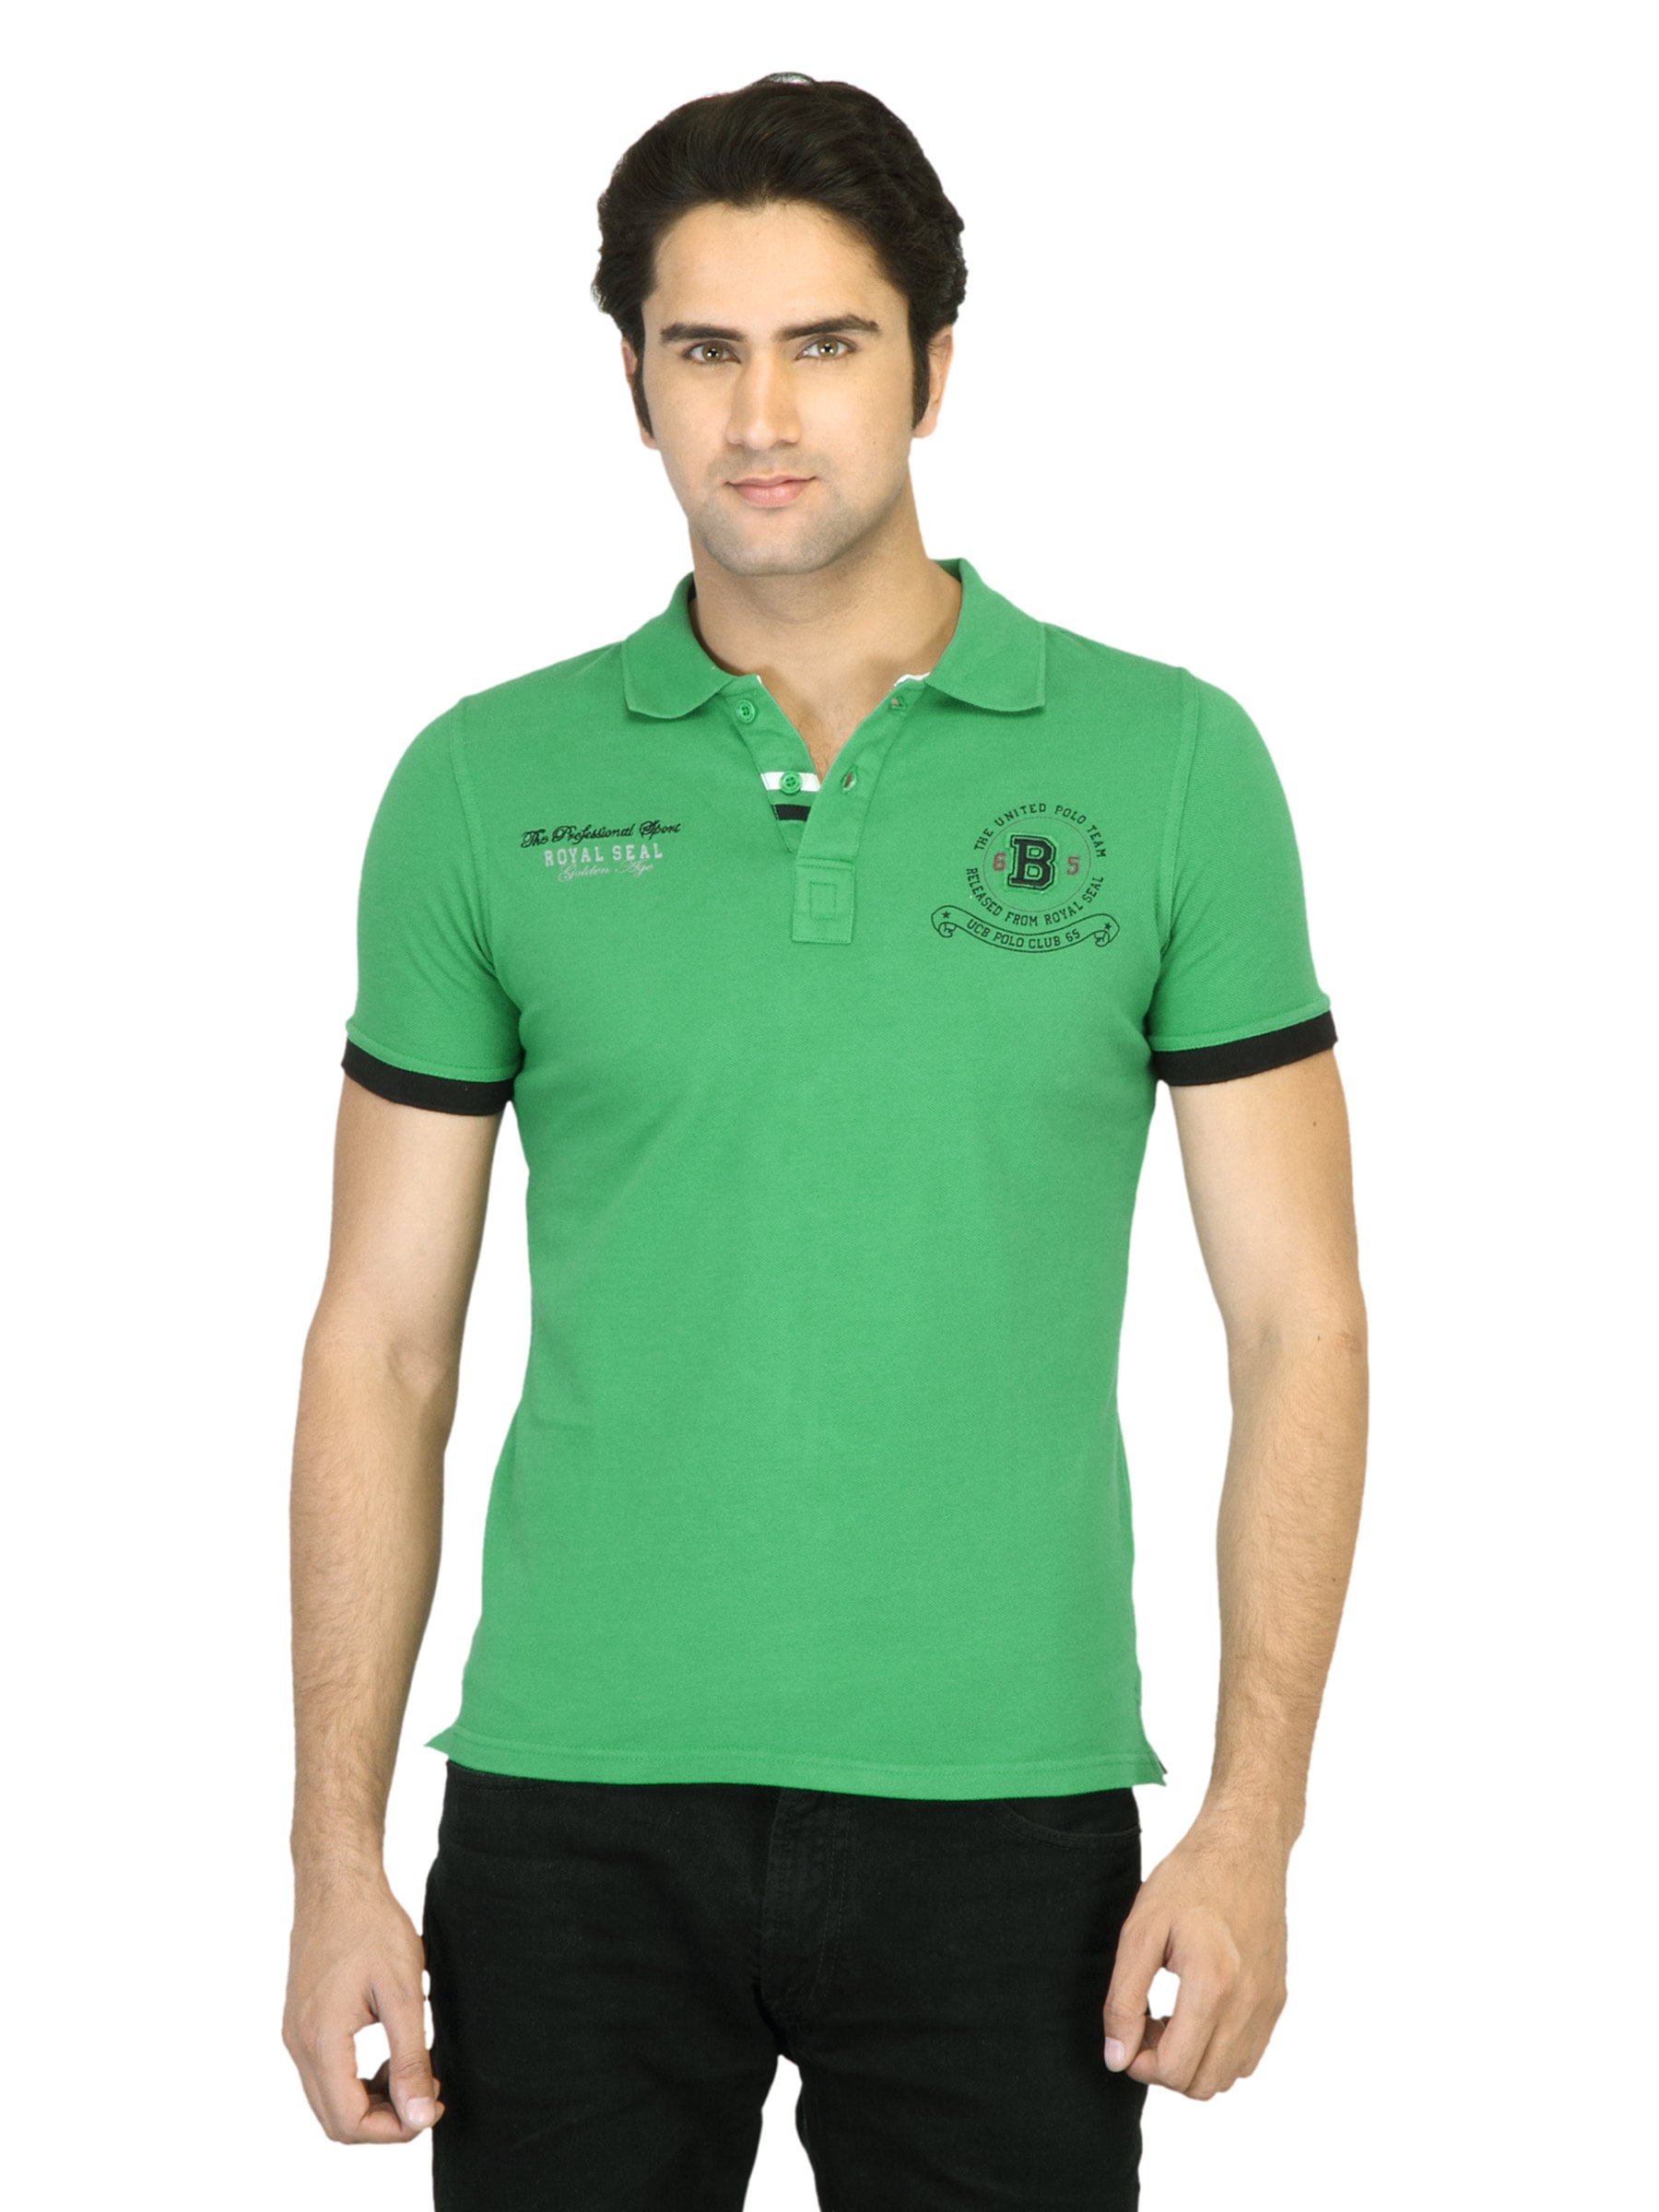 United Colors of Benetton Men Printed Green T-shirt